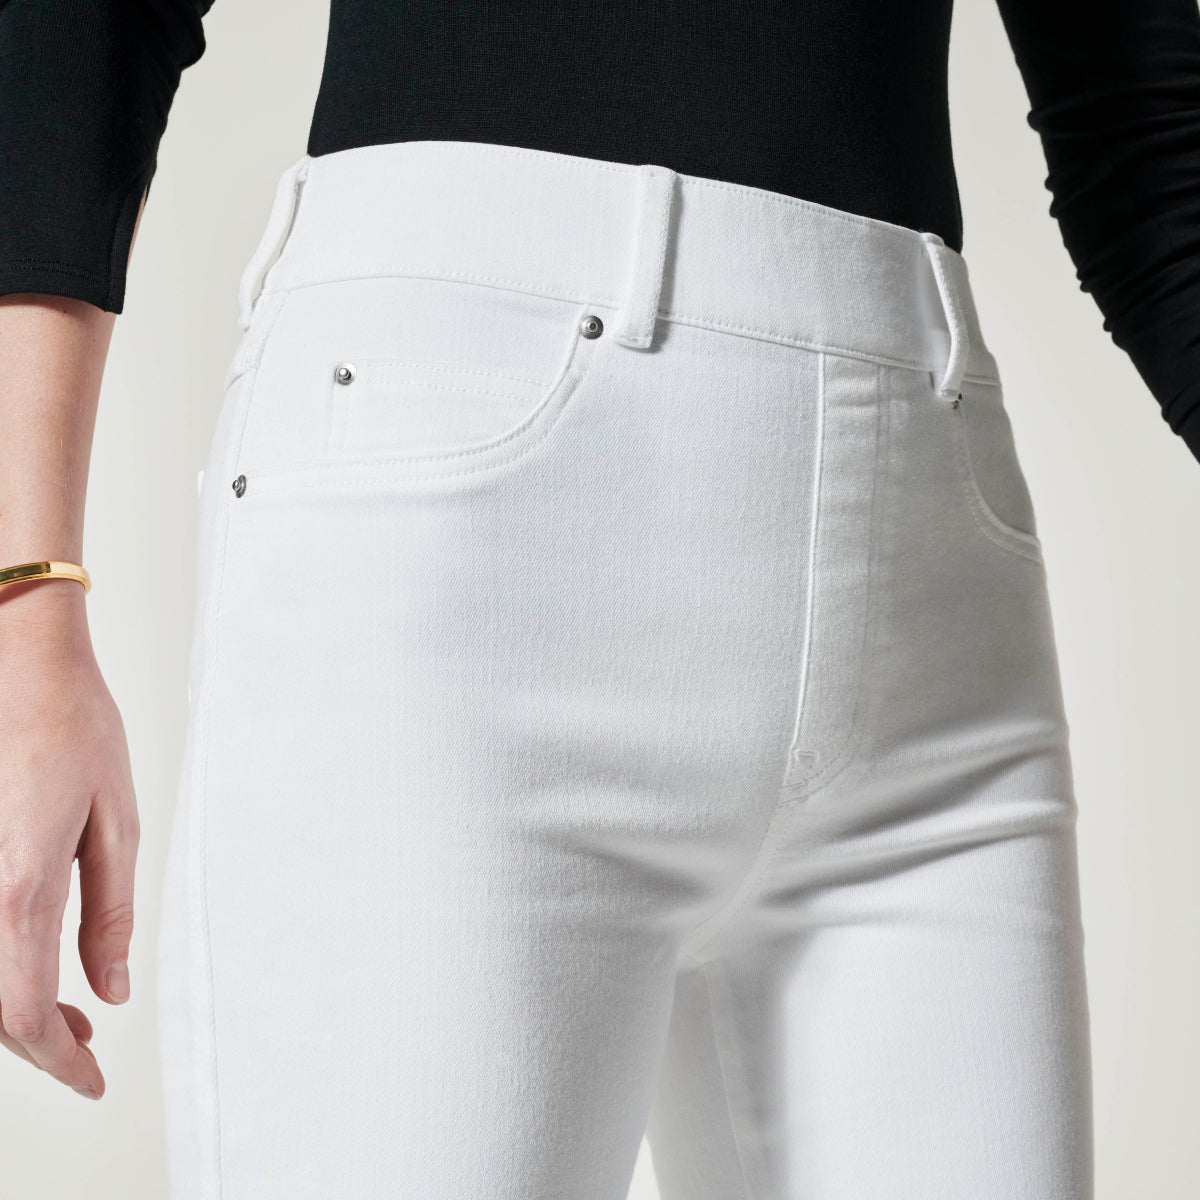 Spanx Ultimate Opacity White Pants - The Motherchic